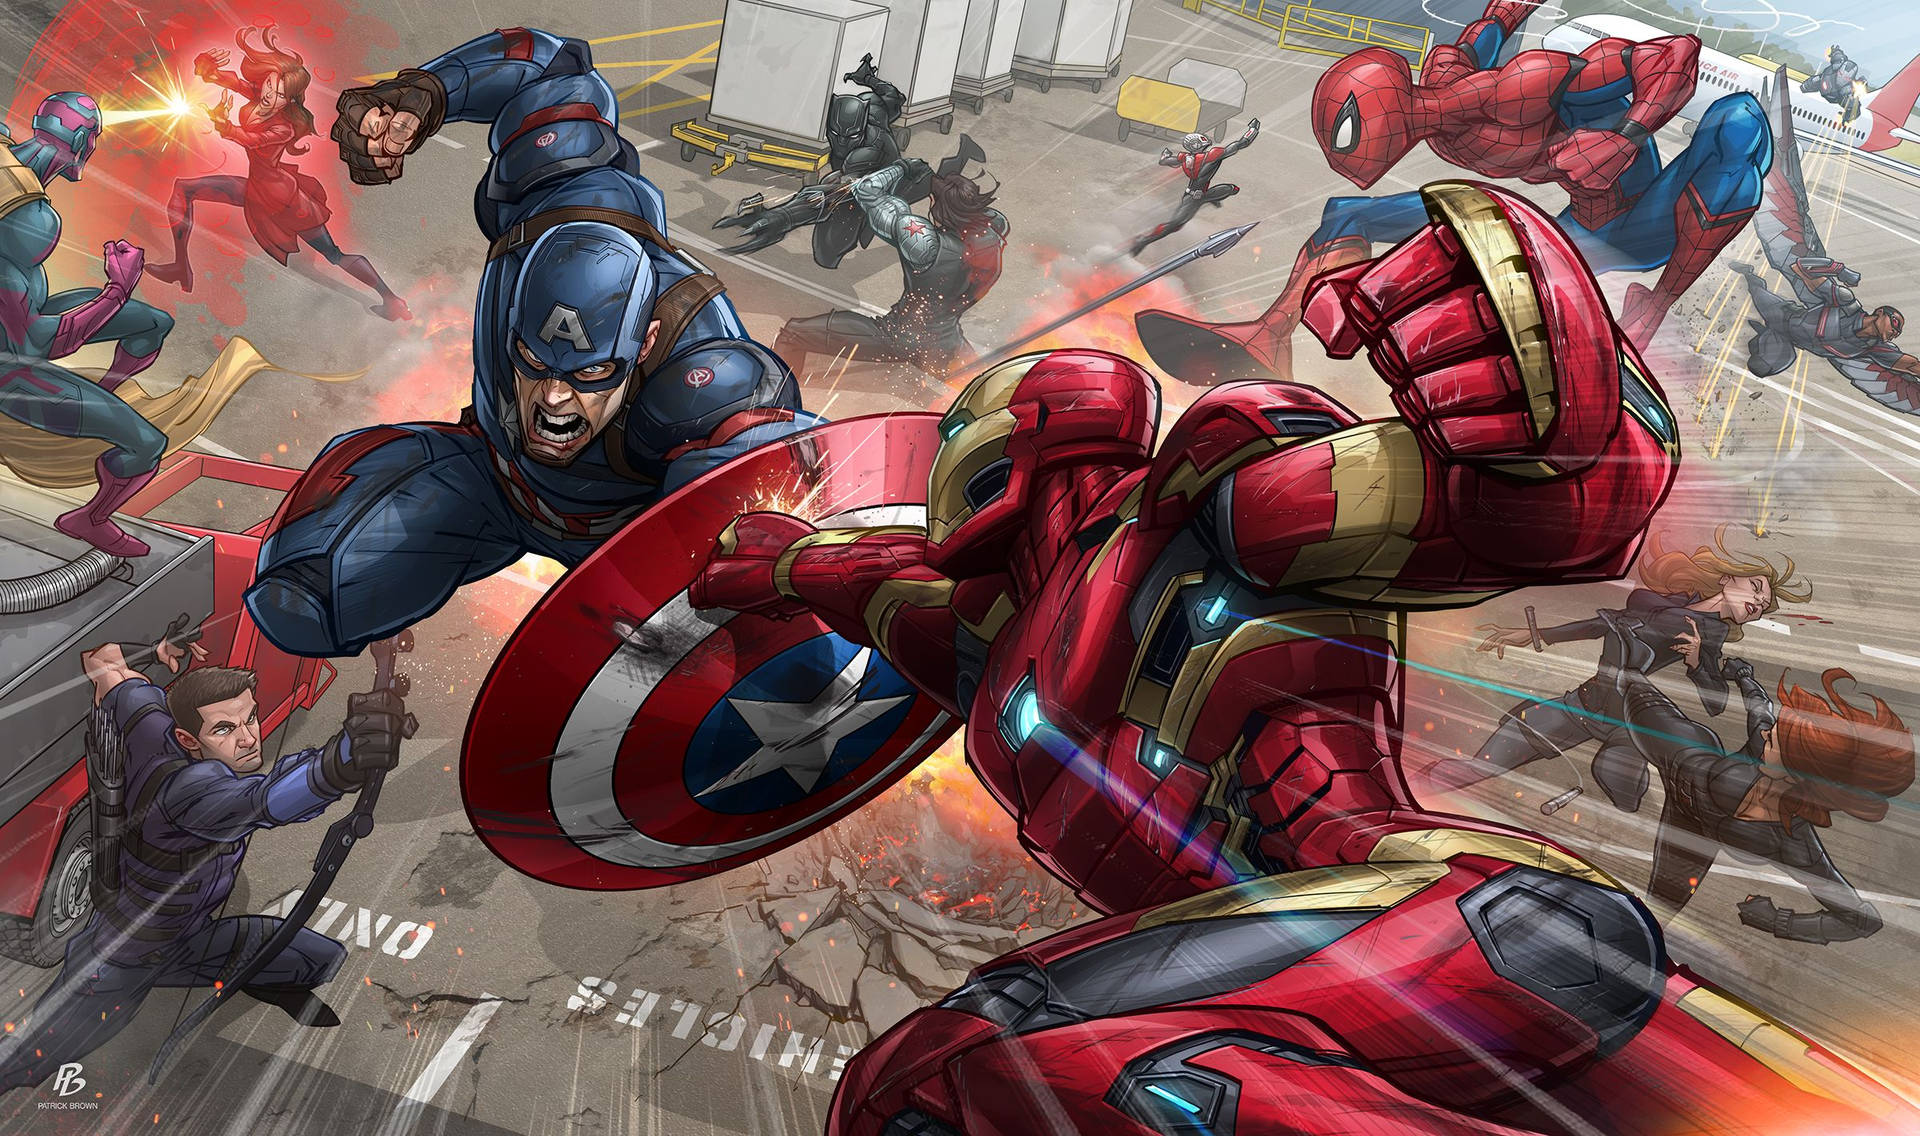 Marvel superheroes captain America and Iron Man fighting.